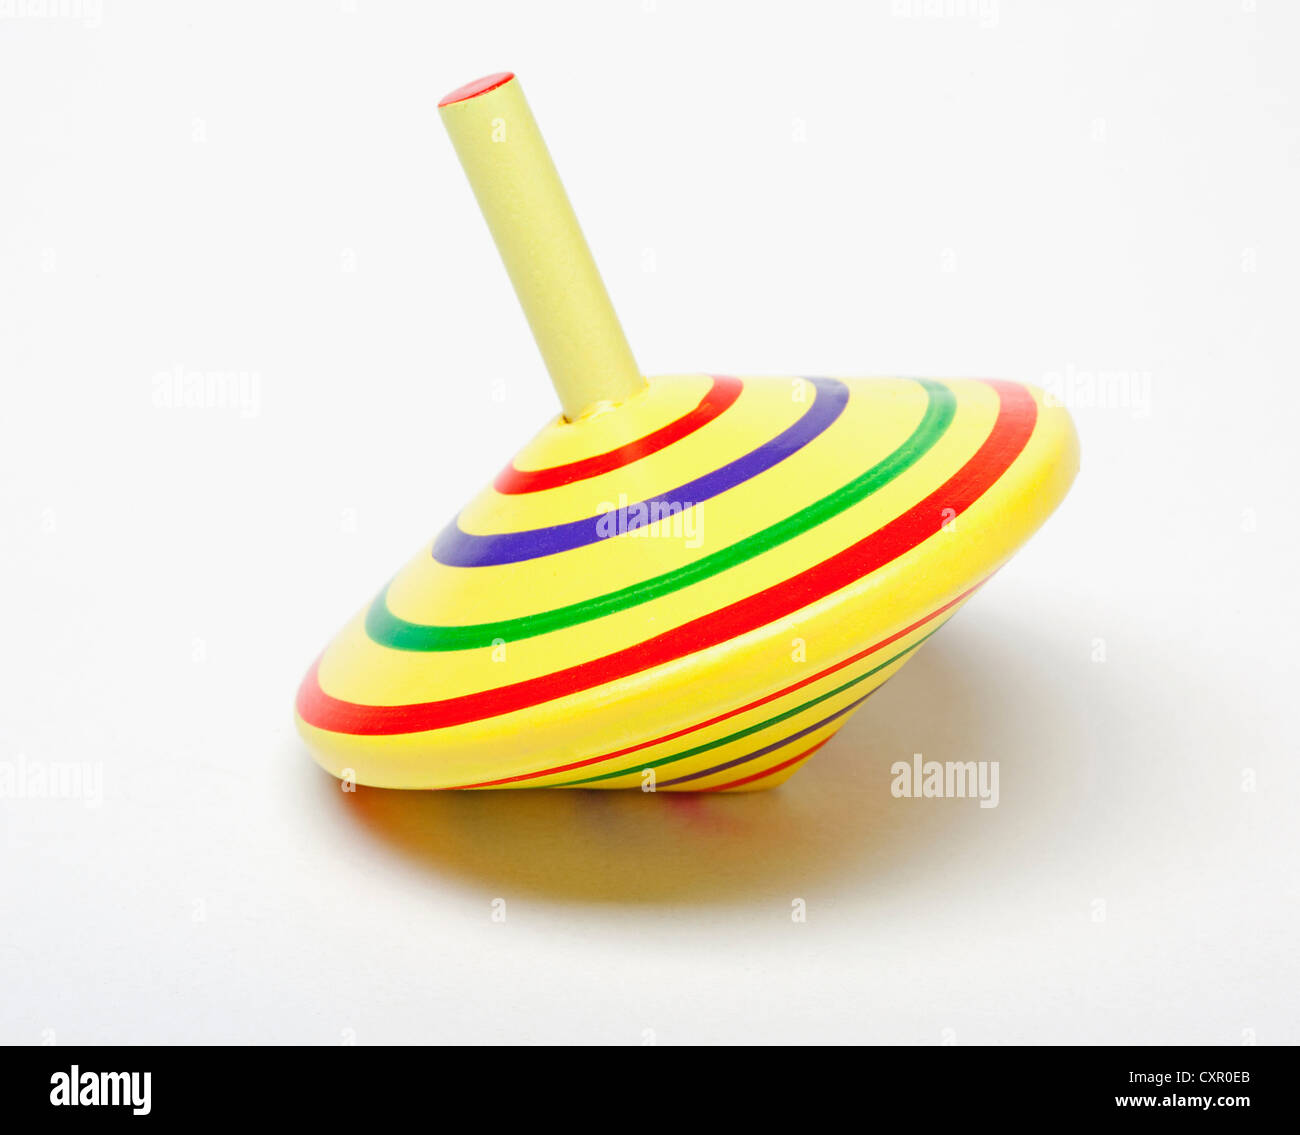 Yellow spinning top Stock Photo